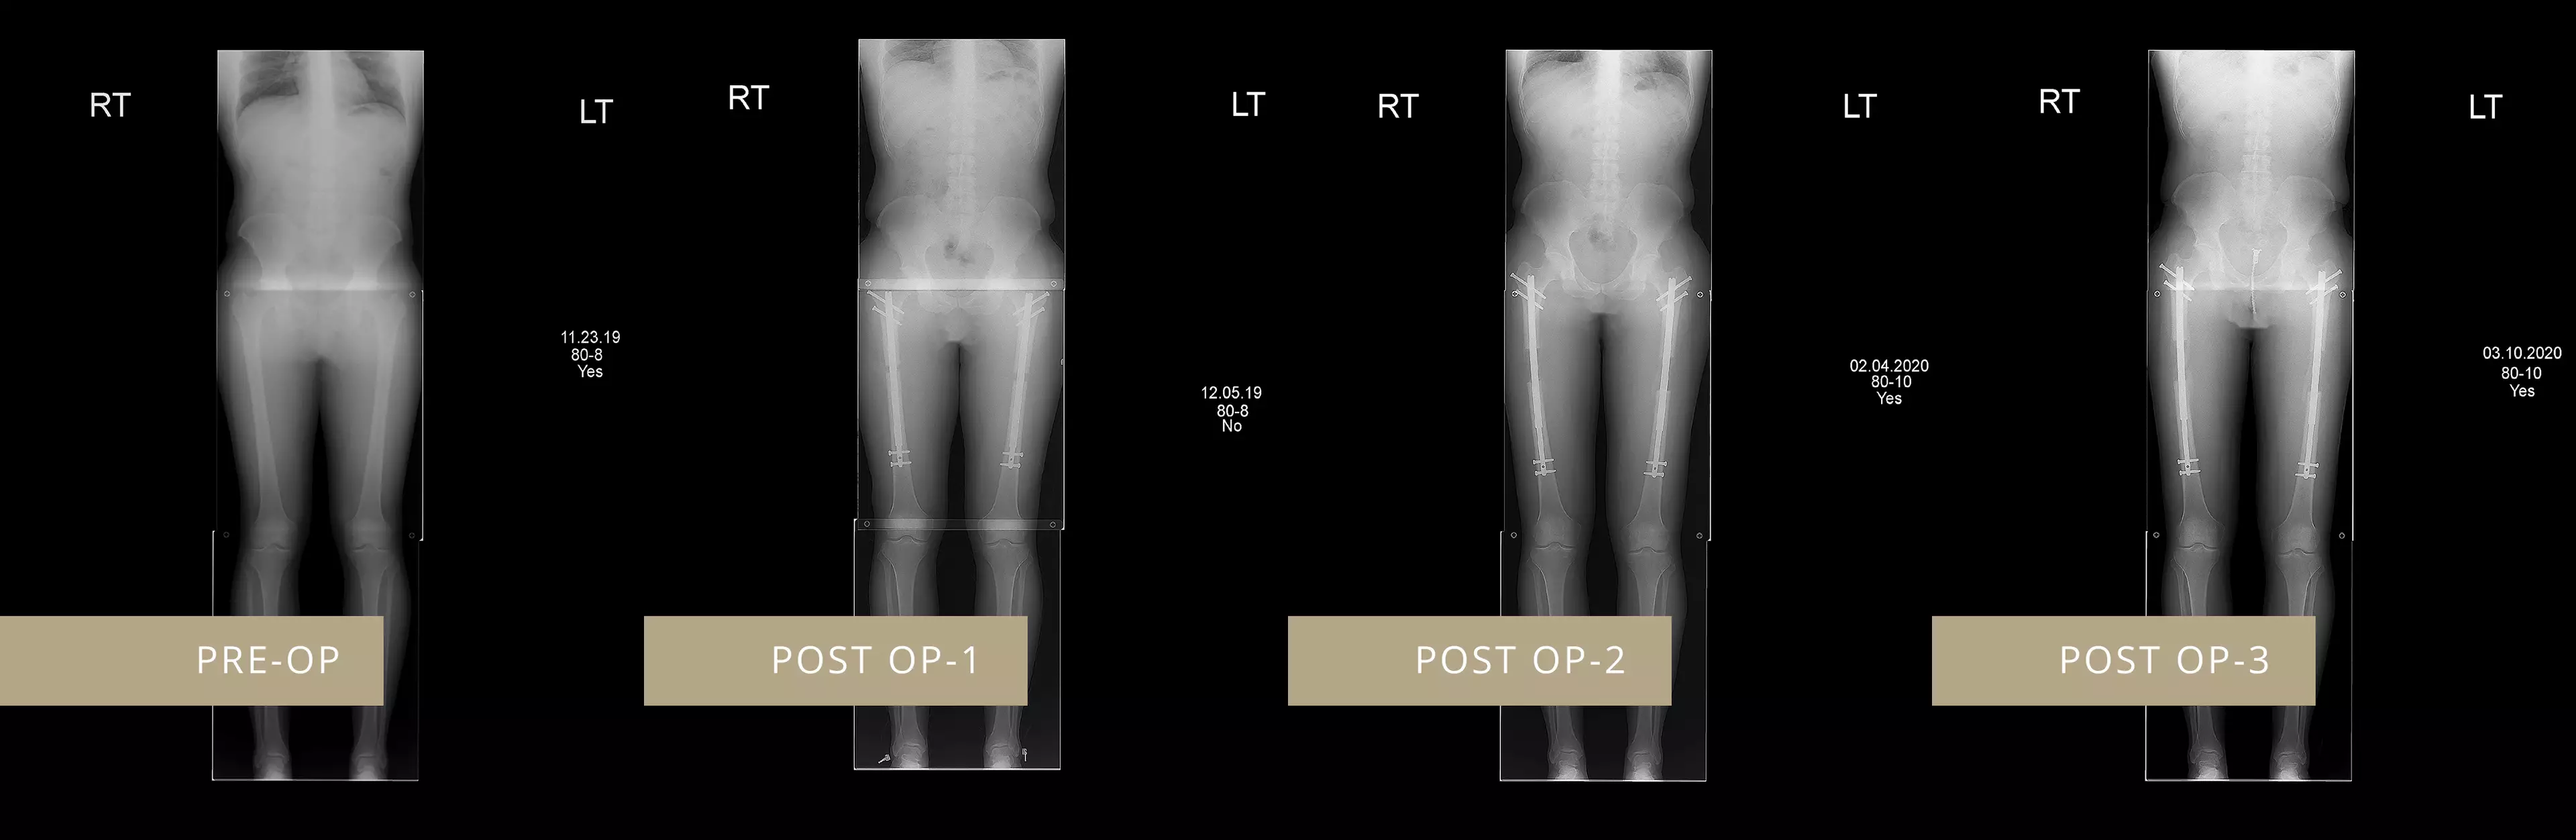 X-rays showing the procedure.